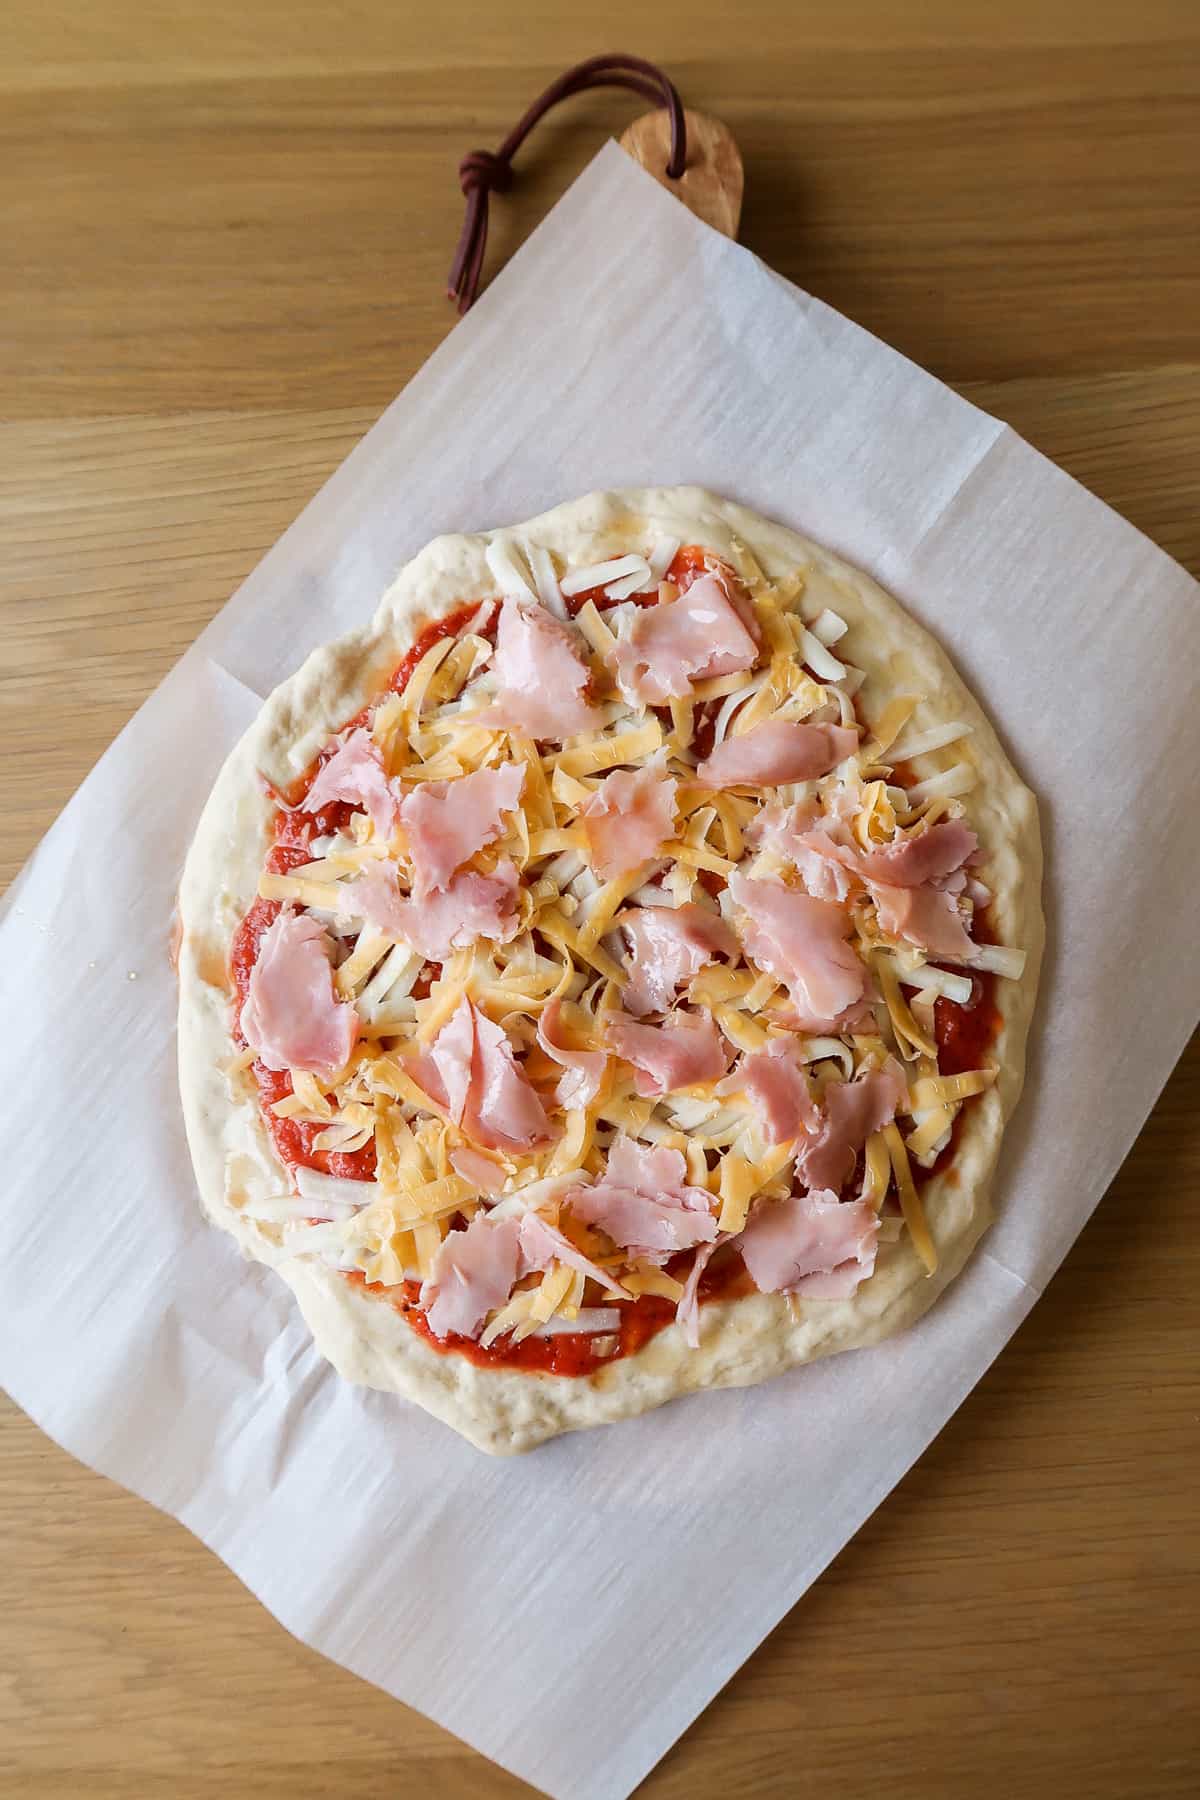 A prepped pizza before grilling it with ham on top.